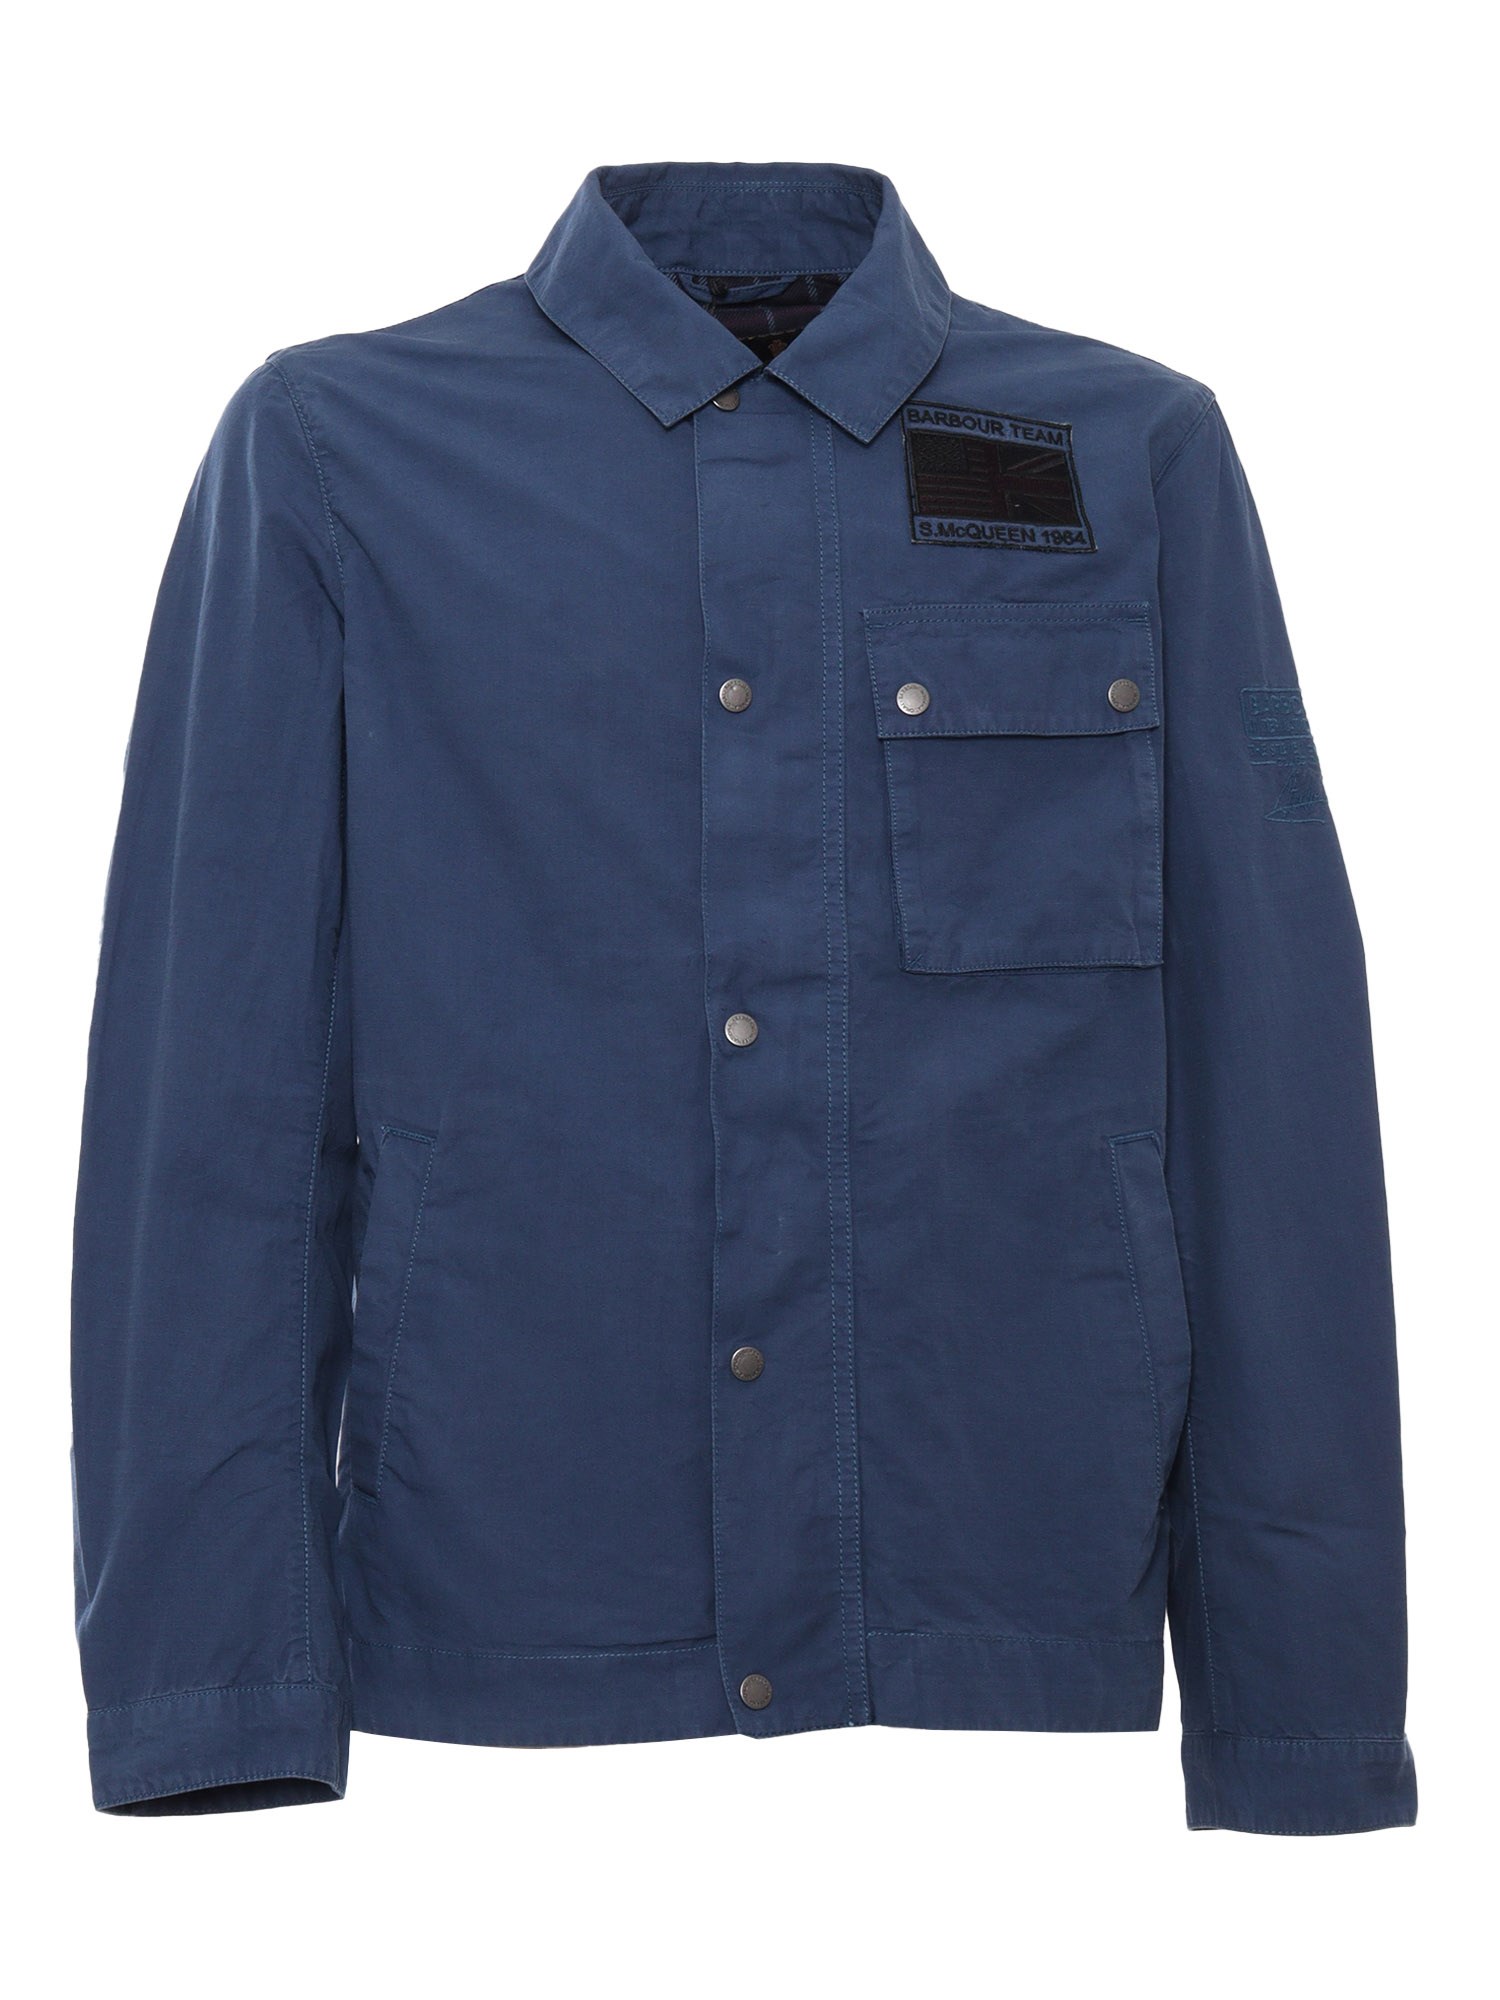 Barbour Casual Blue Jacket